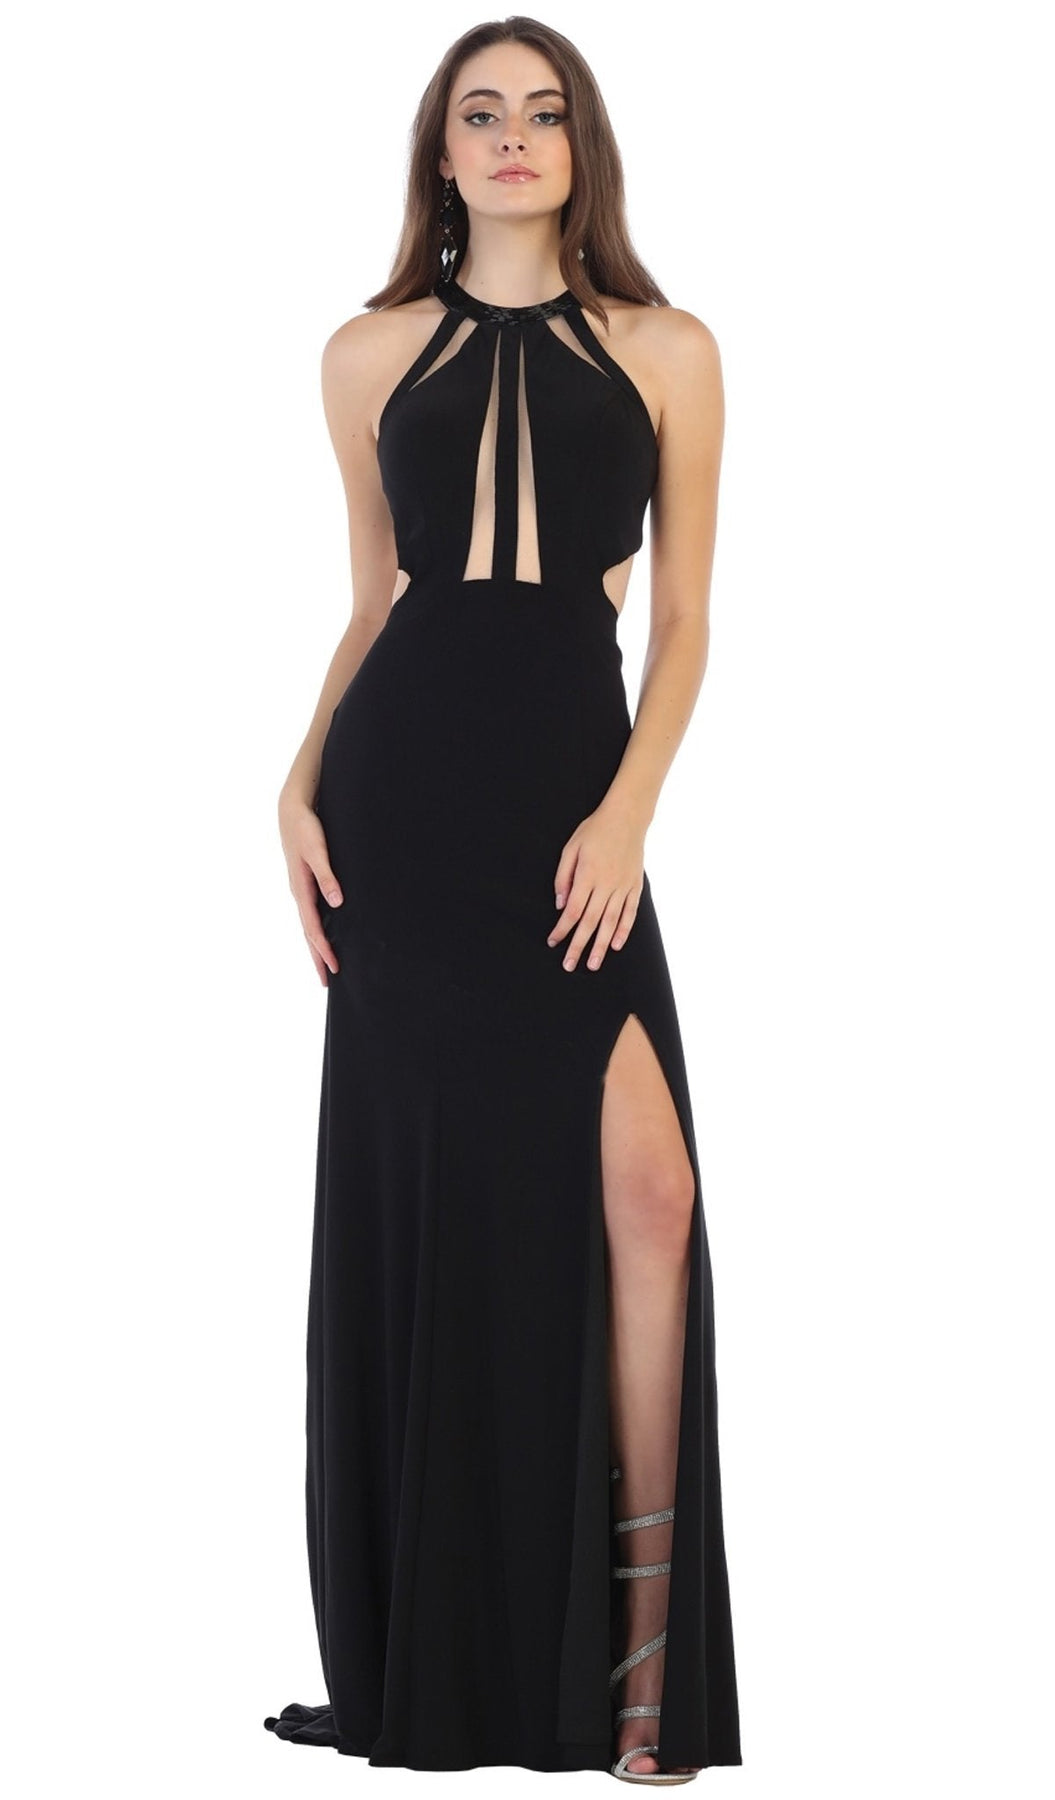 May Queen - MQ1579 Multi-Cutout Beaded Halter Sheath Gown Special Occasion Dress 2 / Black